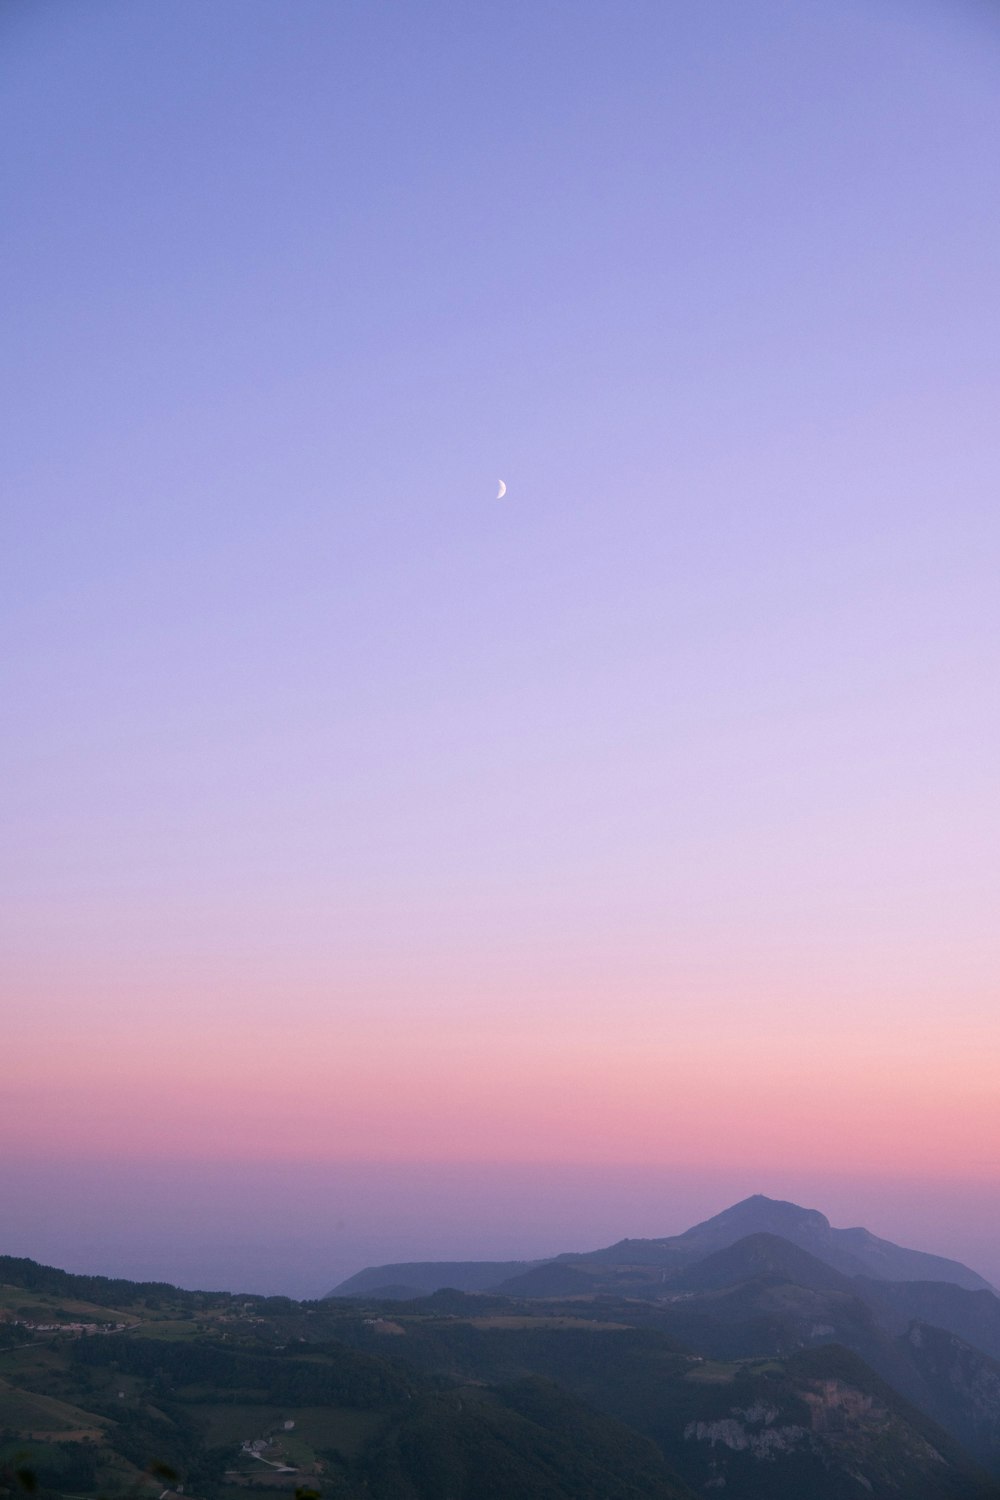 a view of a hill with a moon in the sky